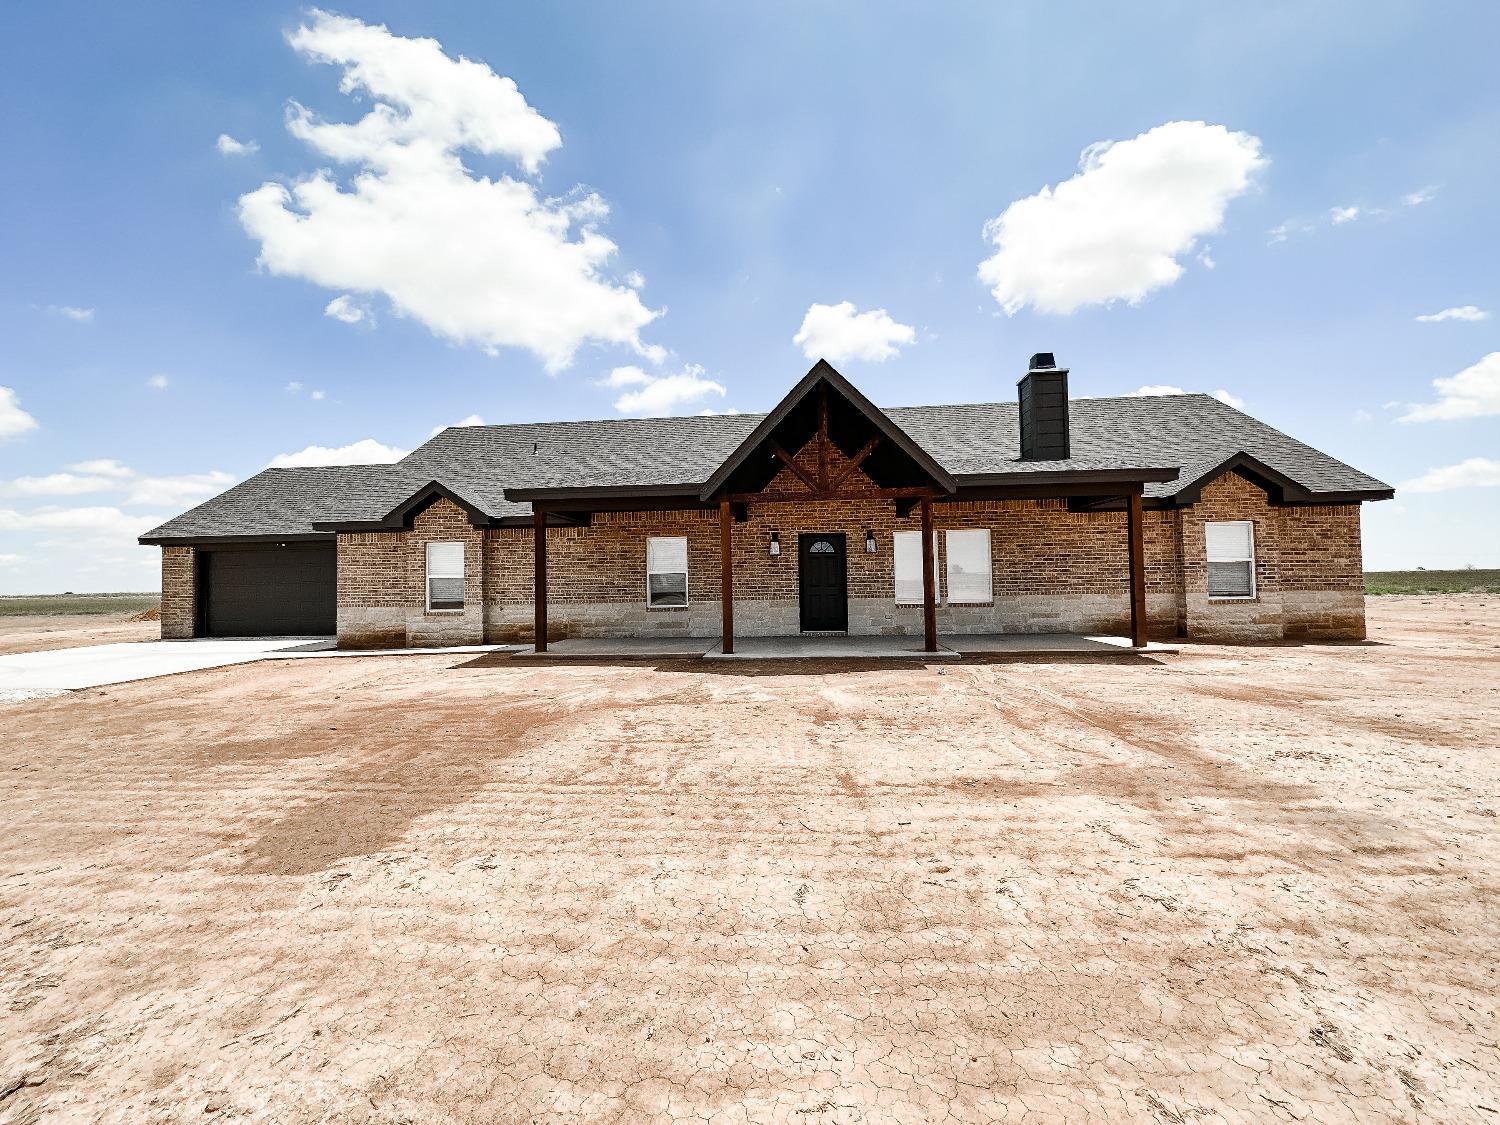 Come see this Beautiful New Construction Home by H&M Construction and Design, LLC! Located on 10.01 Acres in Abernathy ISD. Paved Frontage. This plan features four bedrooms, three bathrooms, a separate laundry room, and a two car garage! The large master suite is isolated from the other bedrooms and features a separate tub, separate shower, and walk in closet! White Quartz Countertops throughout. House has Private Well and Septic. Tract runs east from FM 179 approximately 1378 FT. Deed Restrictions allow for Horses! Don't miss out!